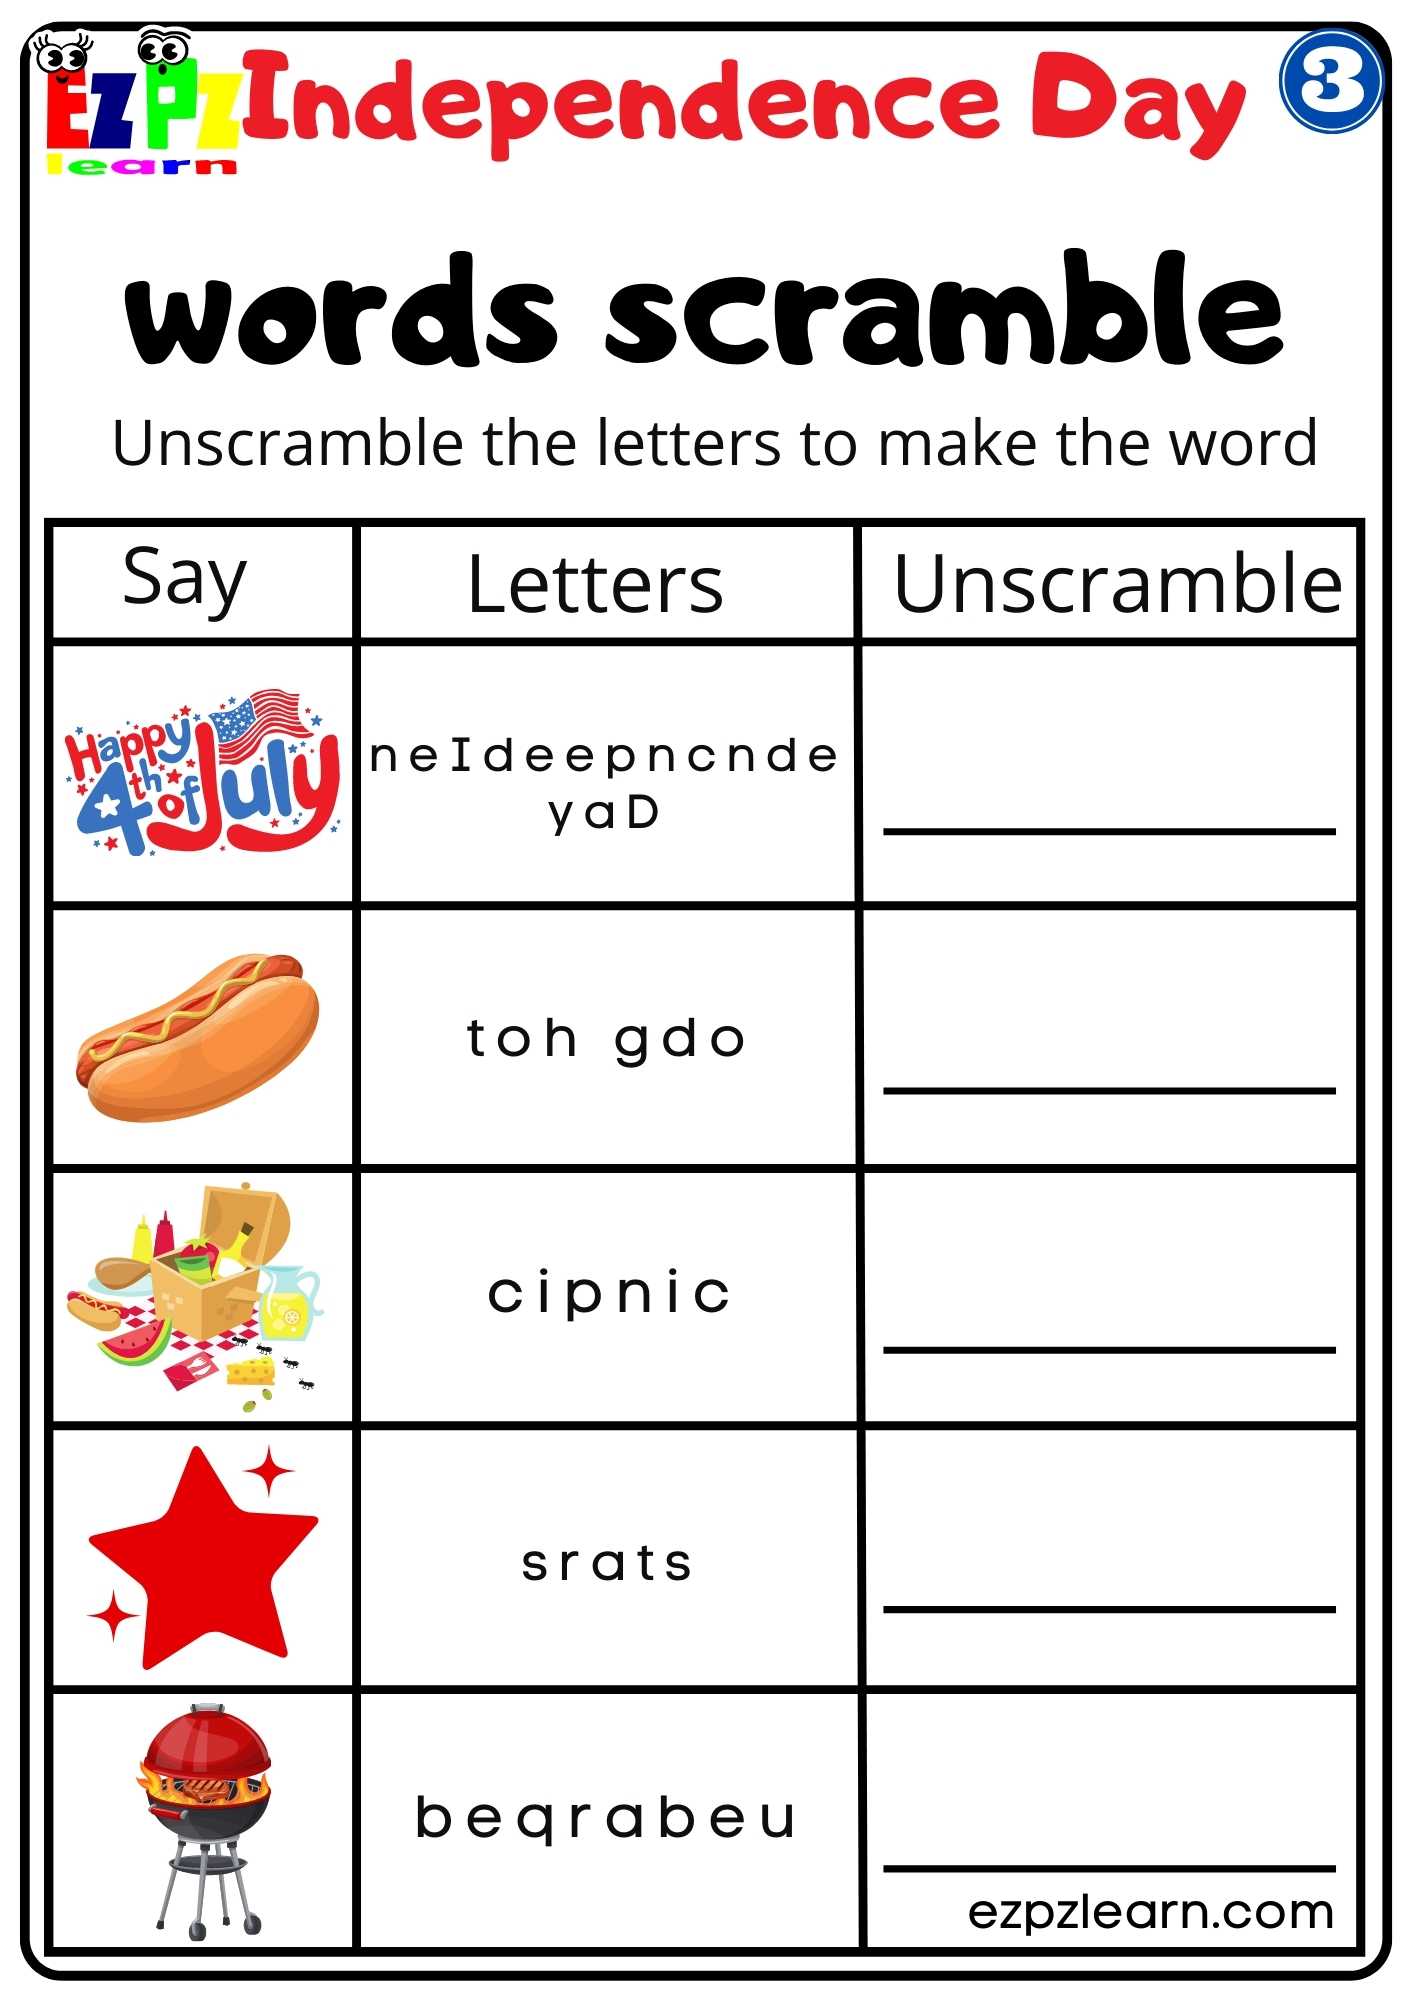 word-scramble-worksheet-for-independence-day-group-3-ezpzlearn